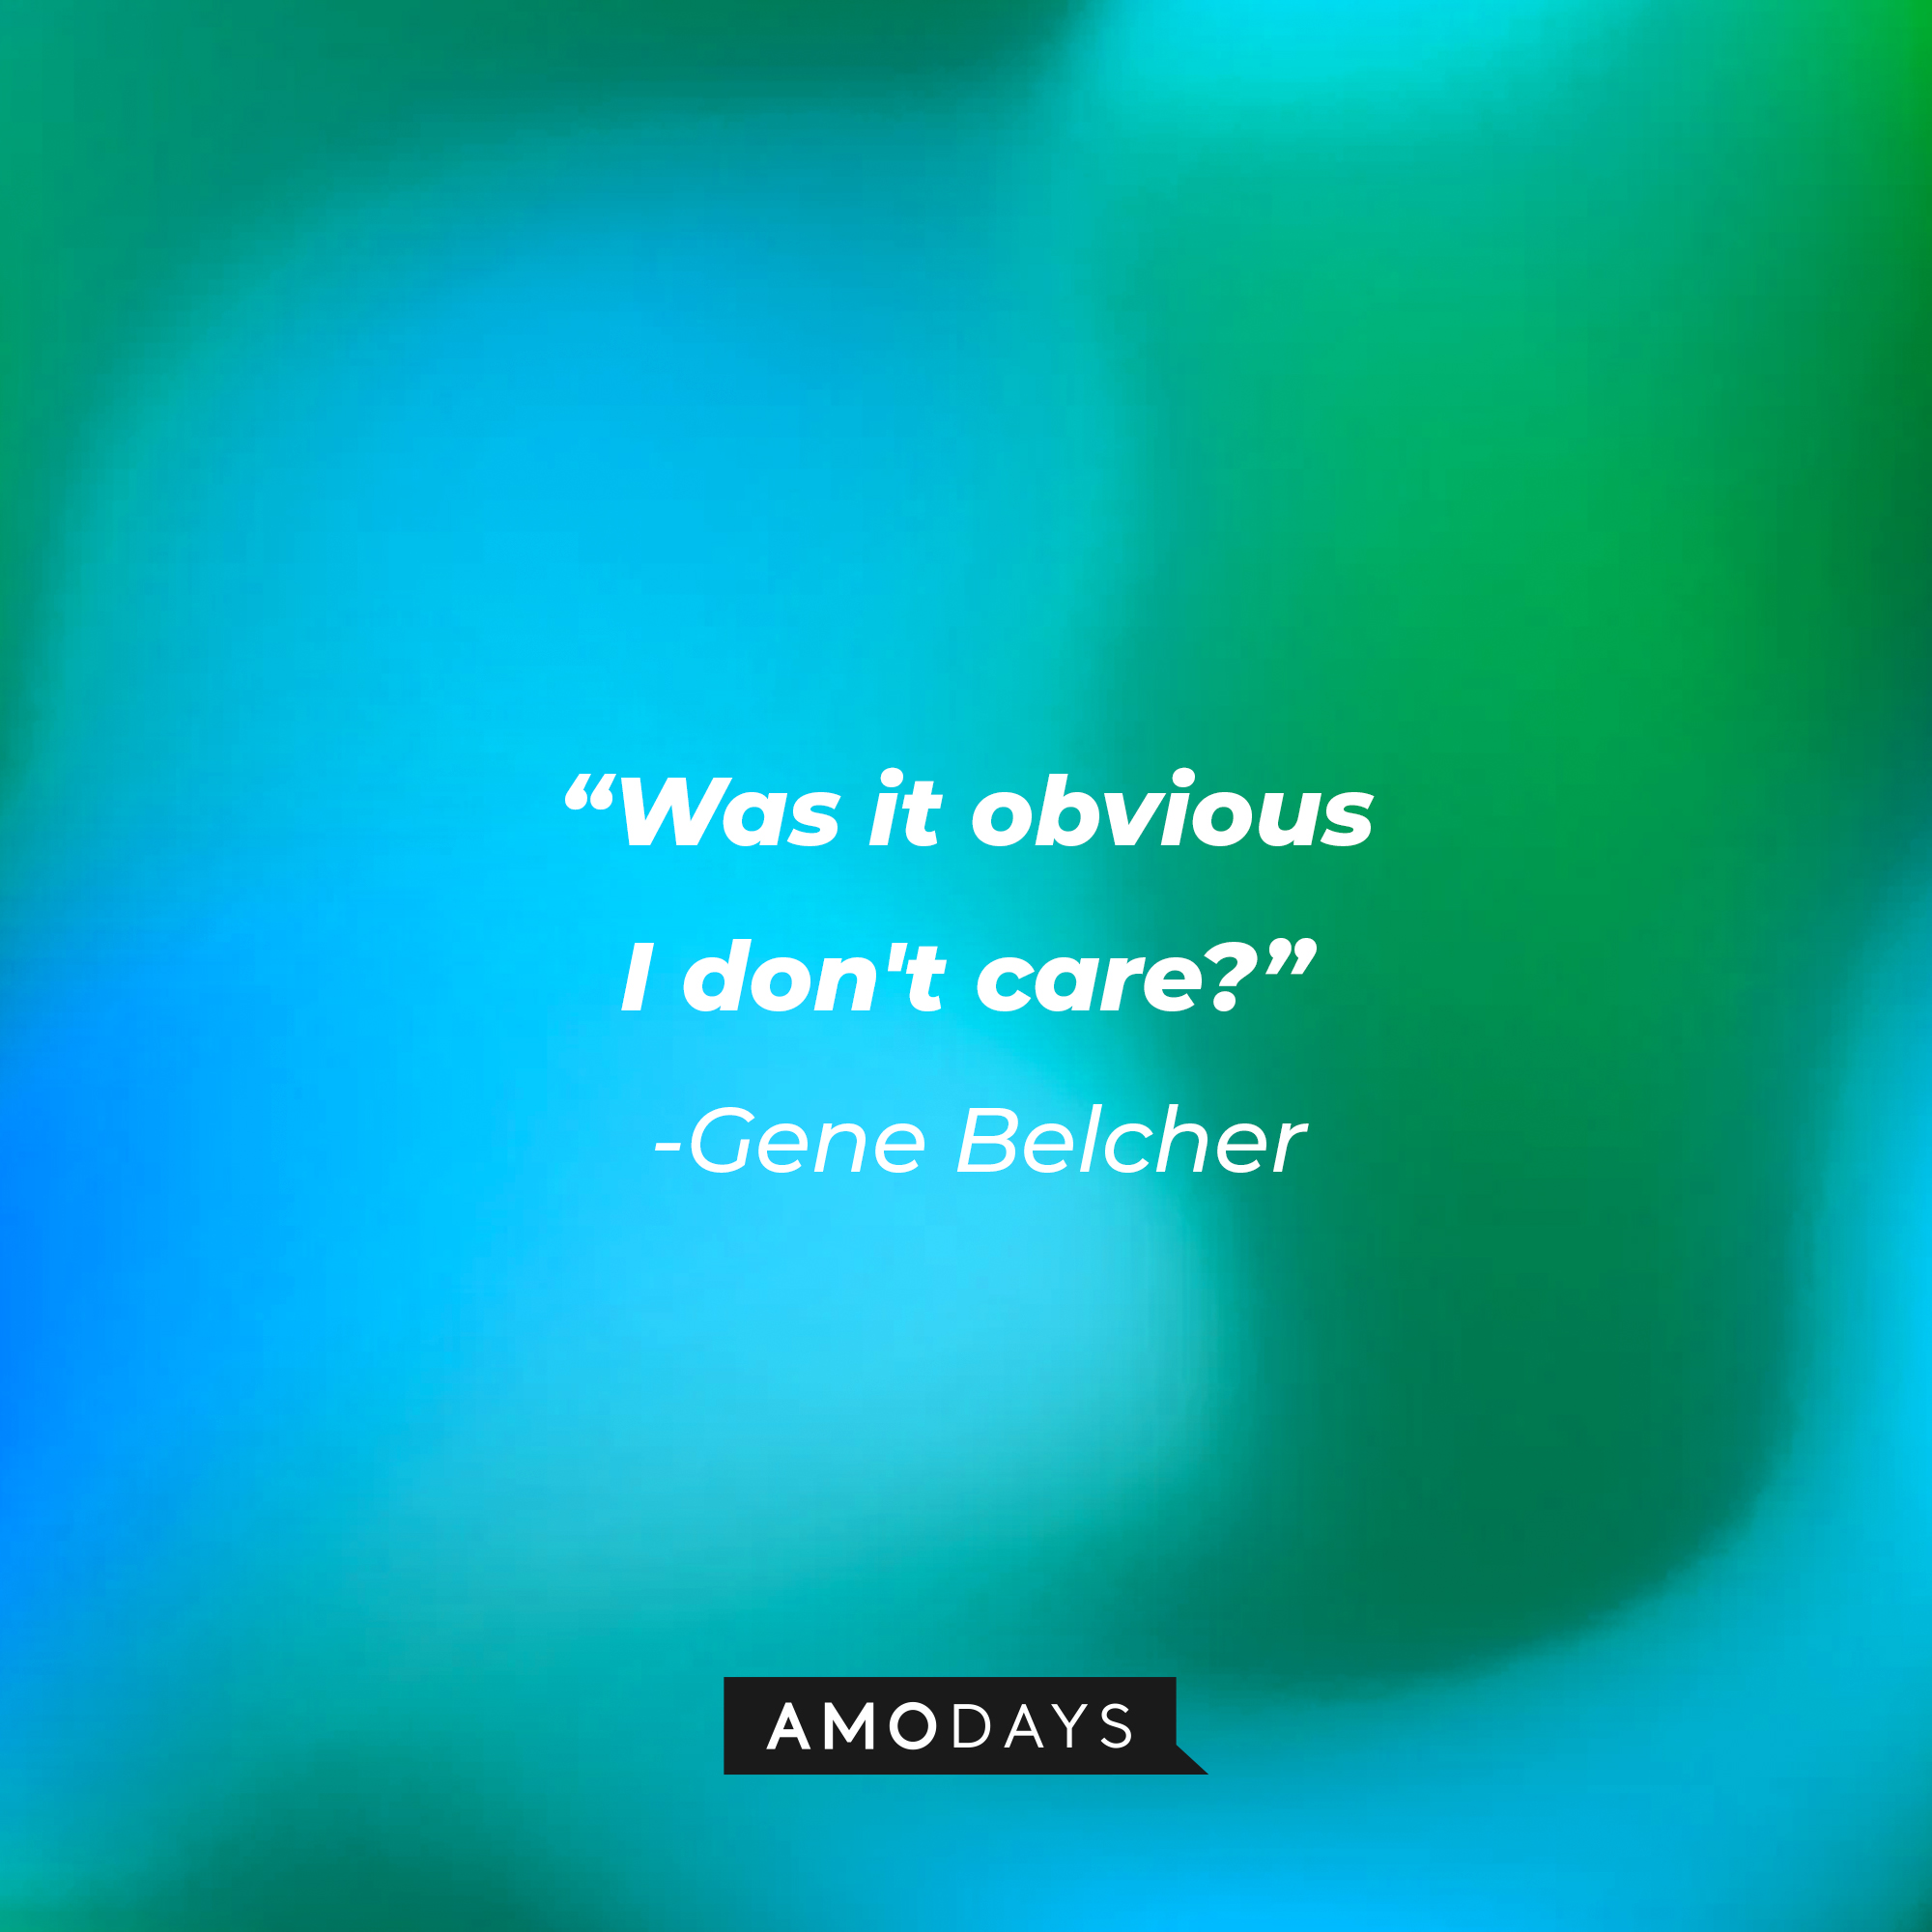 Gene Belcher's quote: "Was it obvious I don't care?" | Source: Amodays